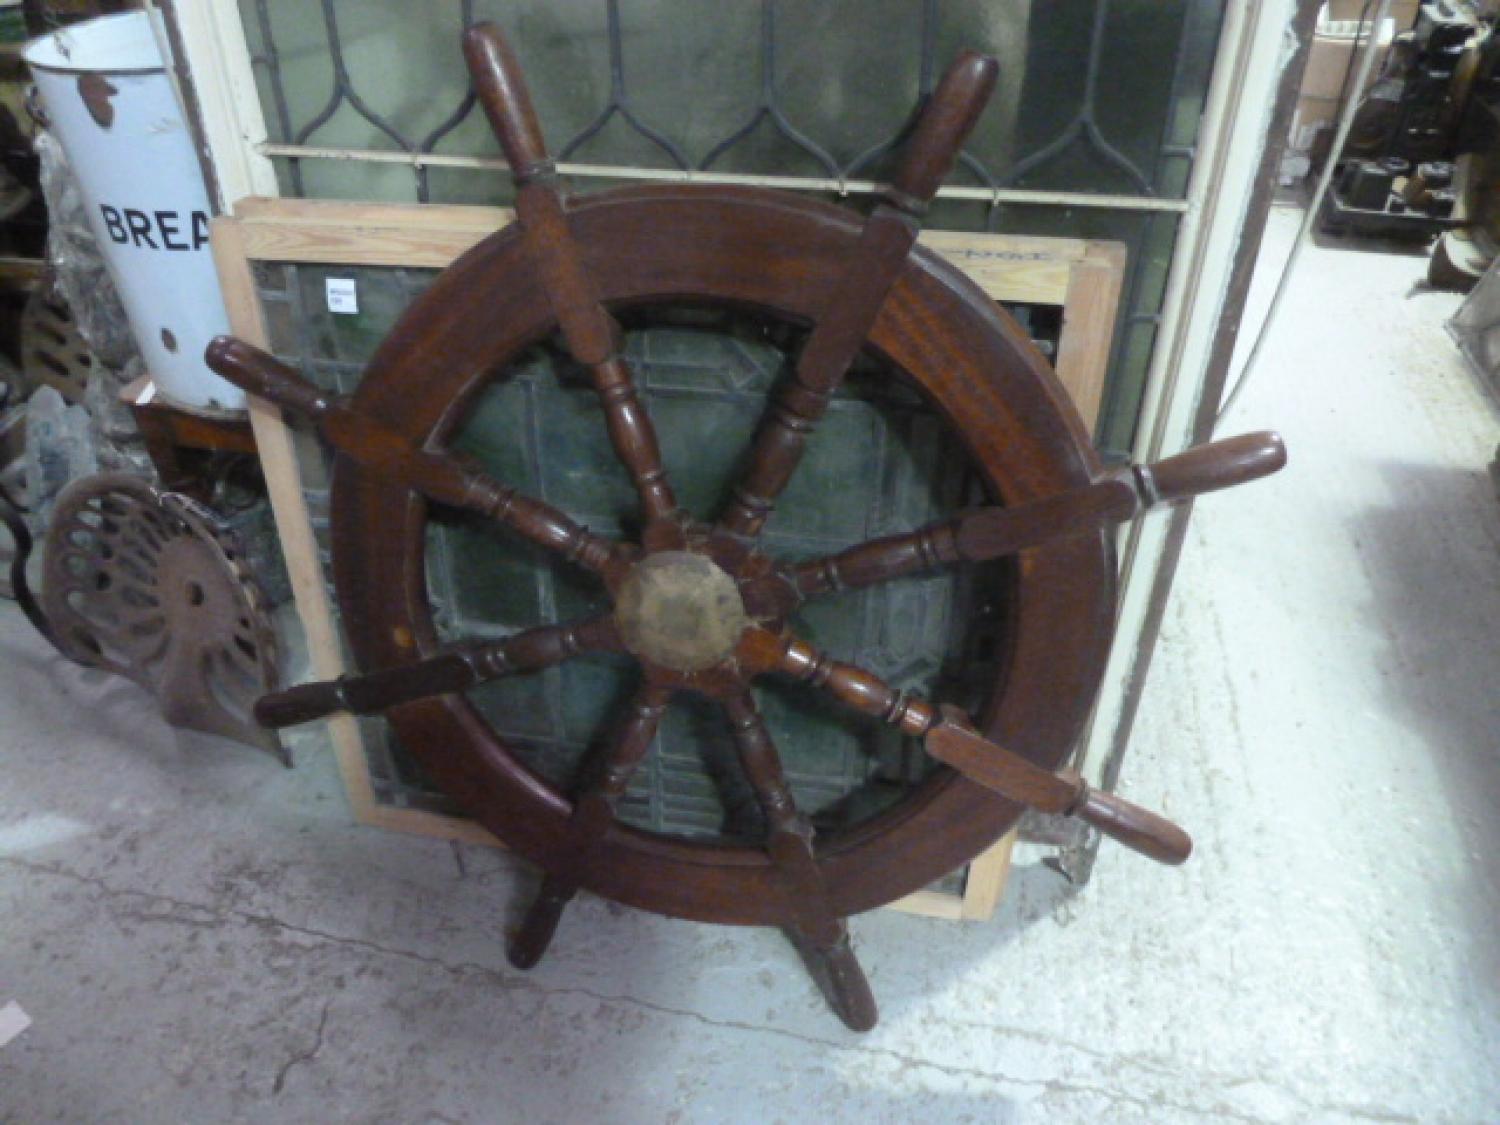 Nice example of nautical/maritime history... original ship wheel with eight turned spokes, shaped handles and brass hub with inset brass banding.